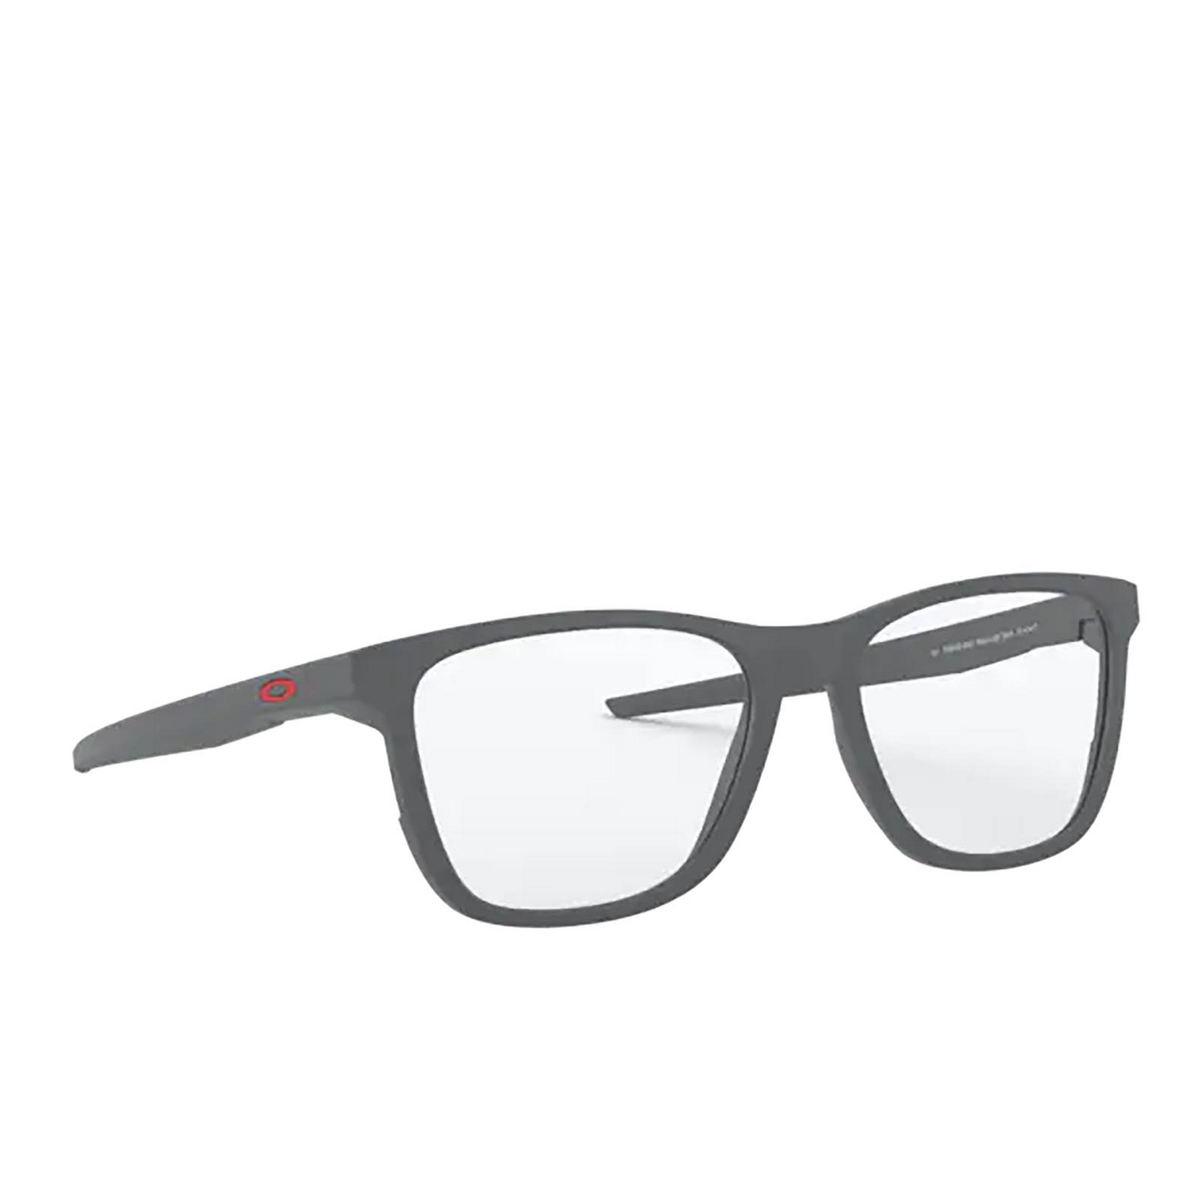 Oakley® Rectangle Eyeglasses: Centerboard OX8163 color Satin Light Steel 816304 - three-quarters view.